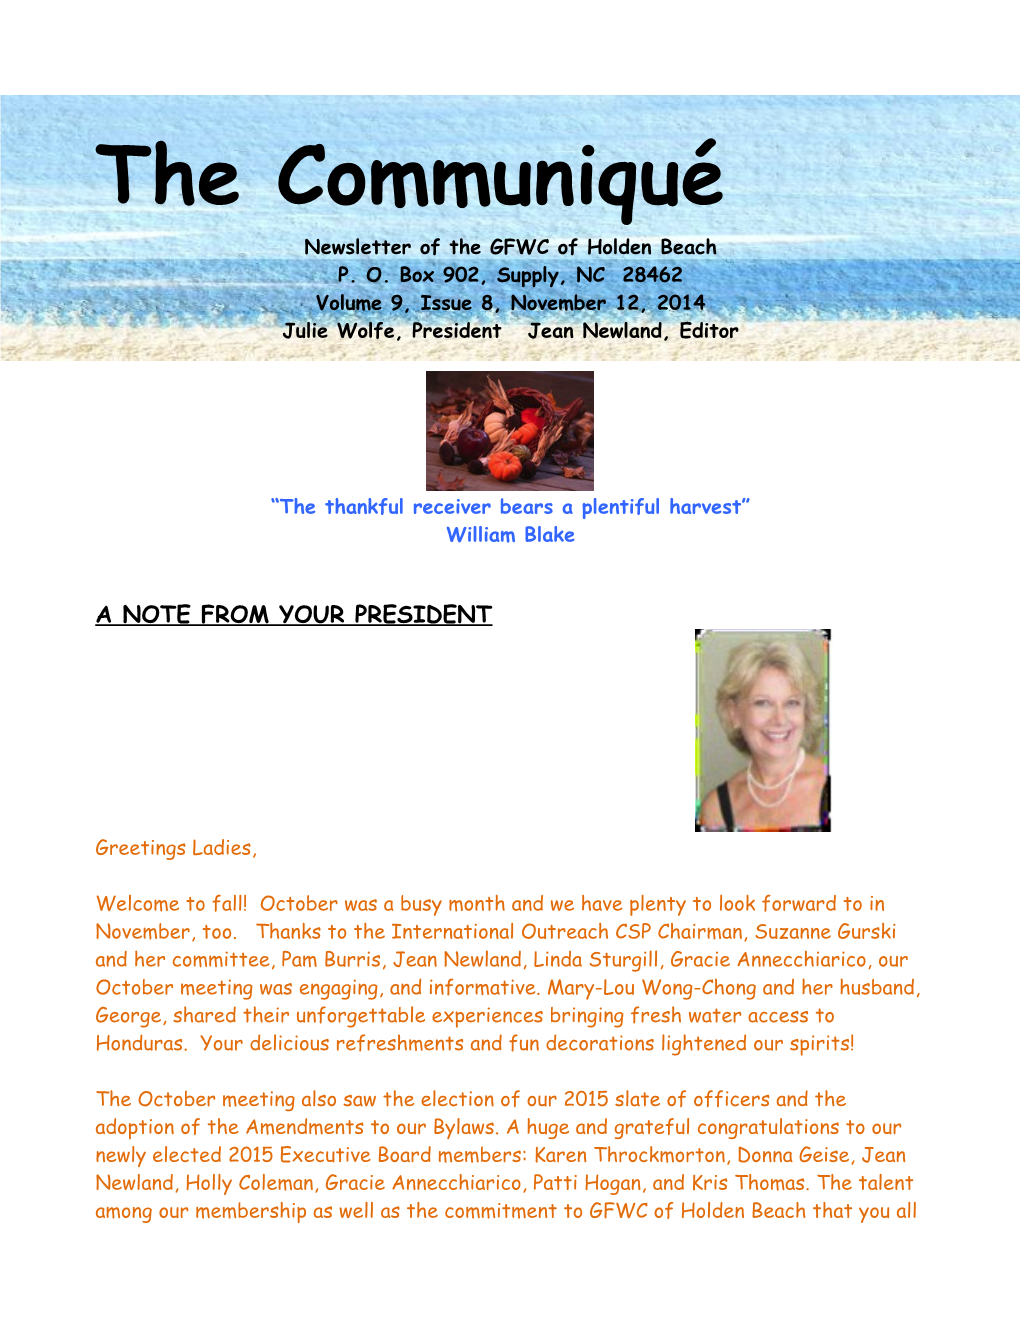 Newsletter of the GFWC of Holden Beach